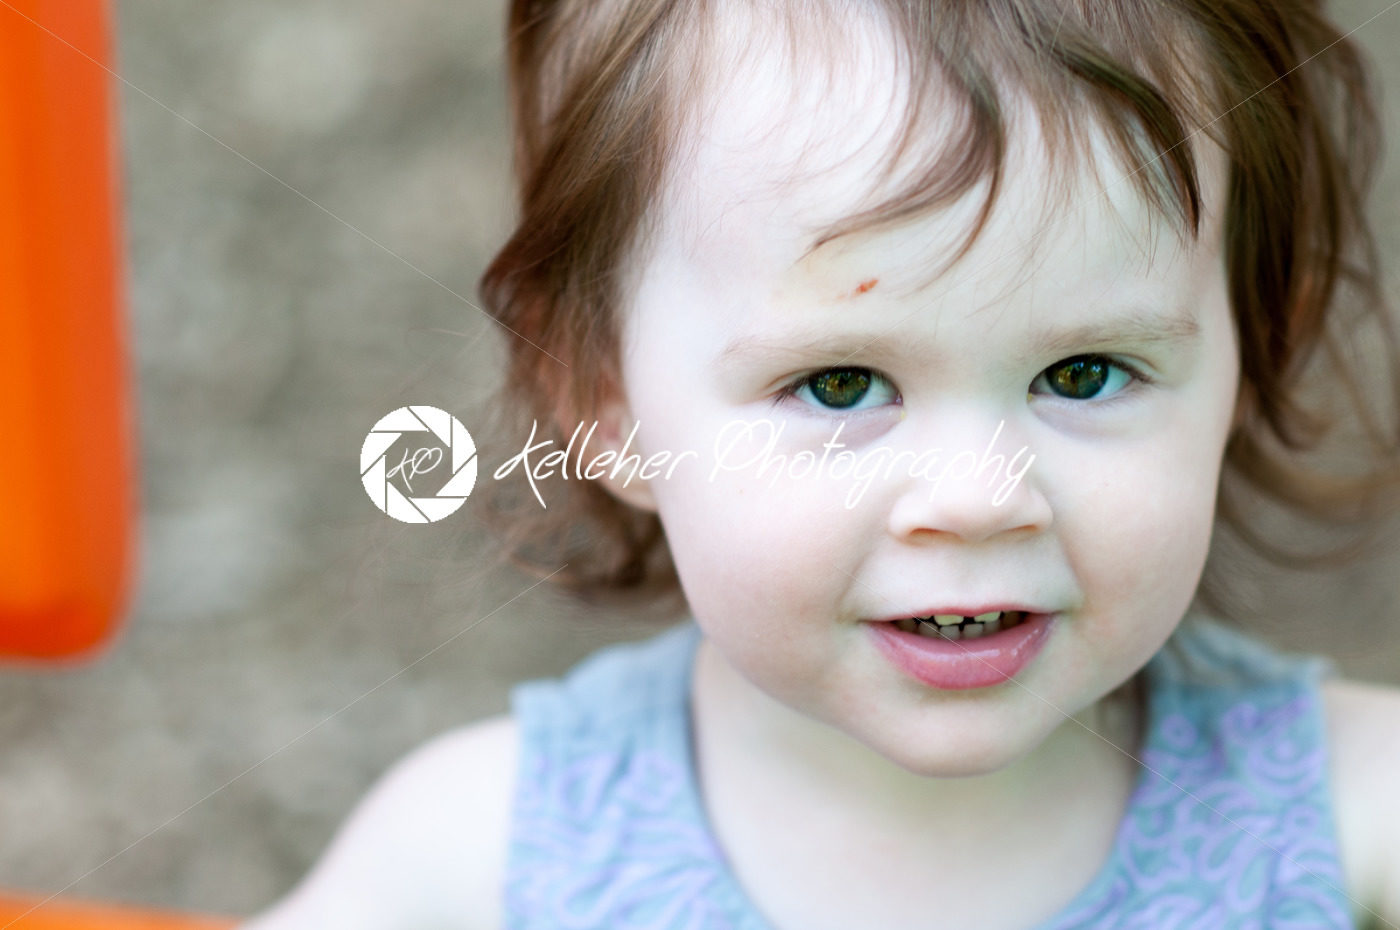 Portrait of a happy liitle girl close-up - Kelleher Photography Store